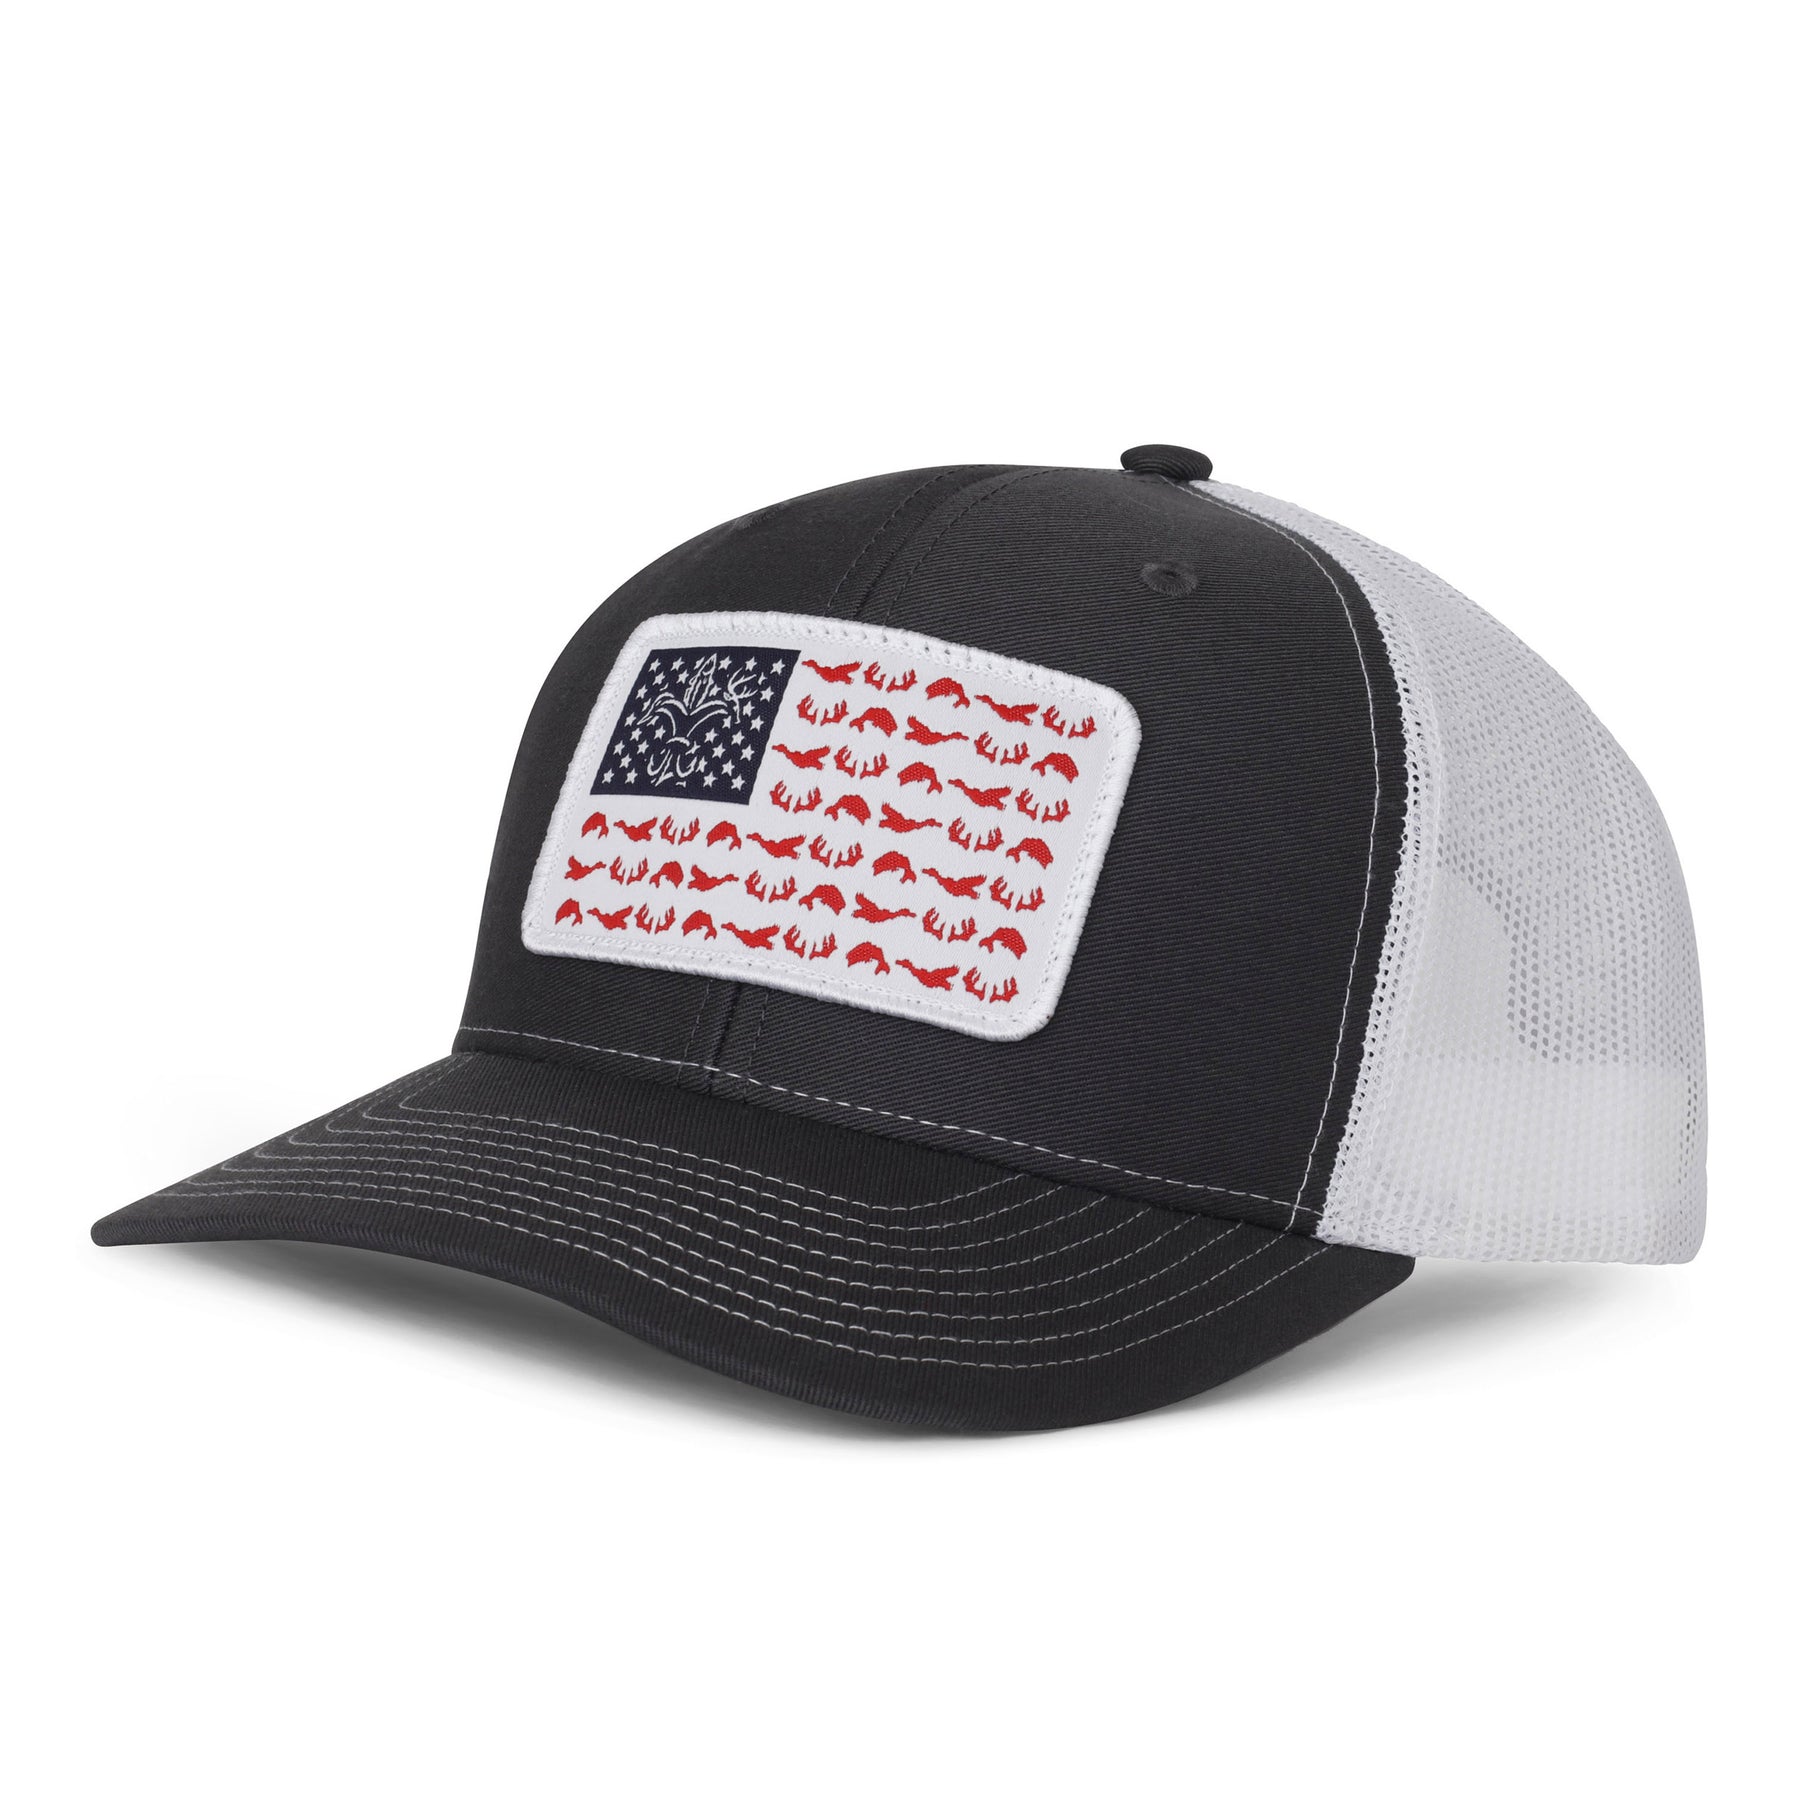 American Fish Flag Trucker Hats - Fishing Gifts for Men - Outdoor Snapback  Fishing Hats Perfect for Camping and Daily Use, 01.black-sliver Fish, One  Size : Buy Online at Best Price in